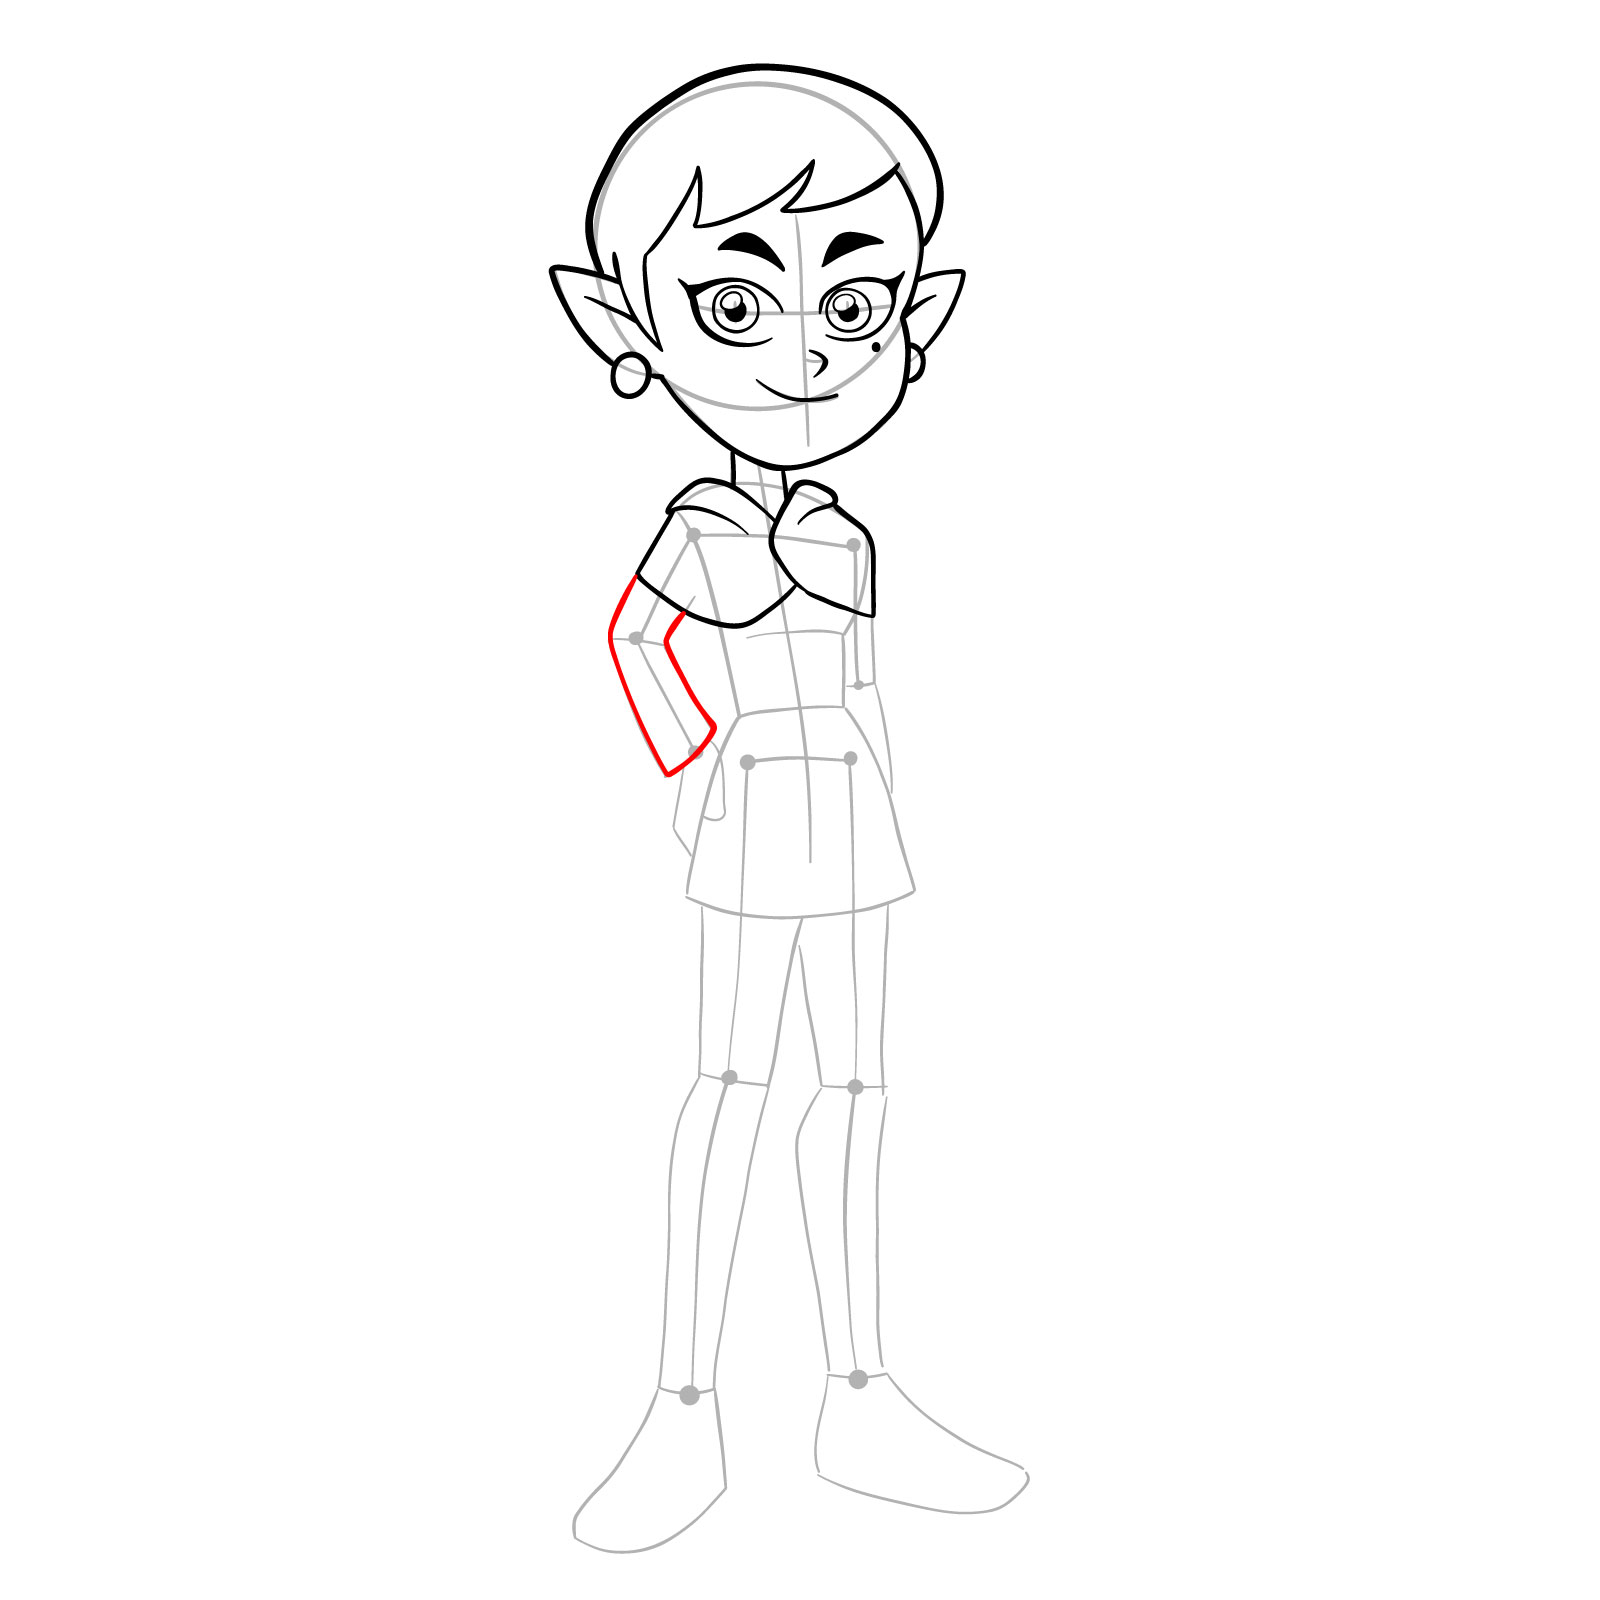 How to draw Emira Blight from The Owl House - step 15